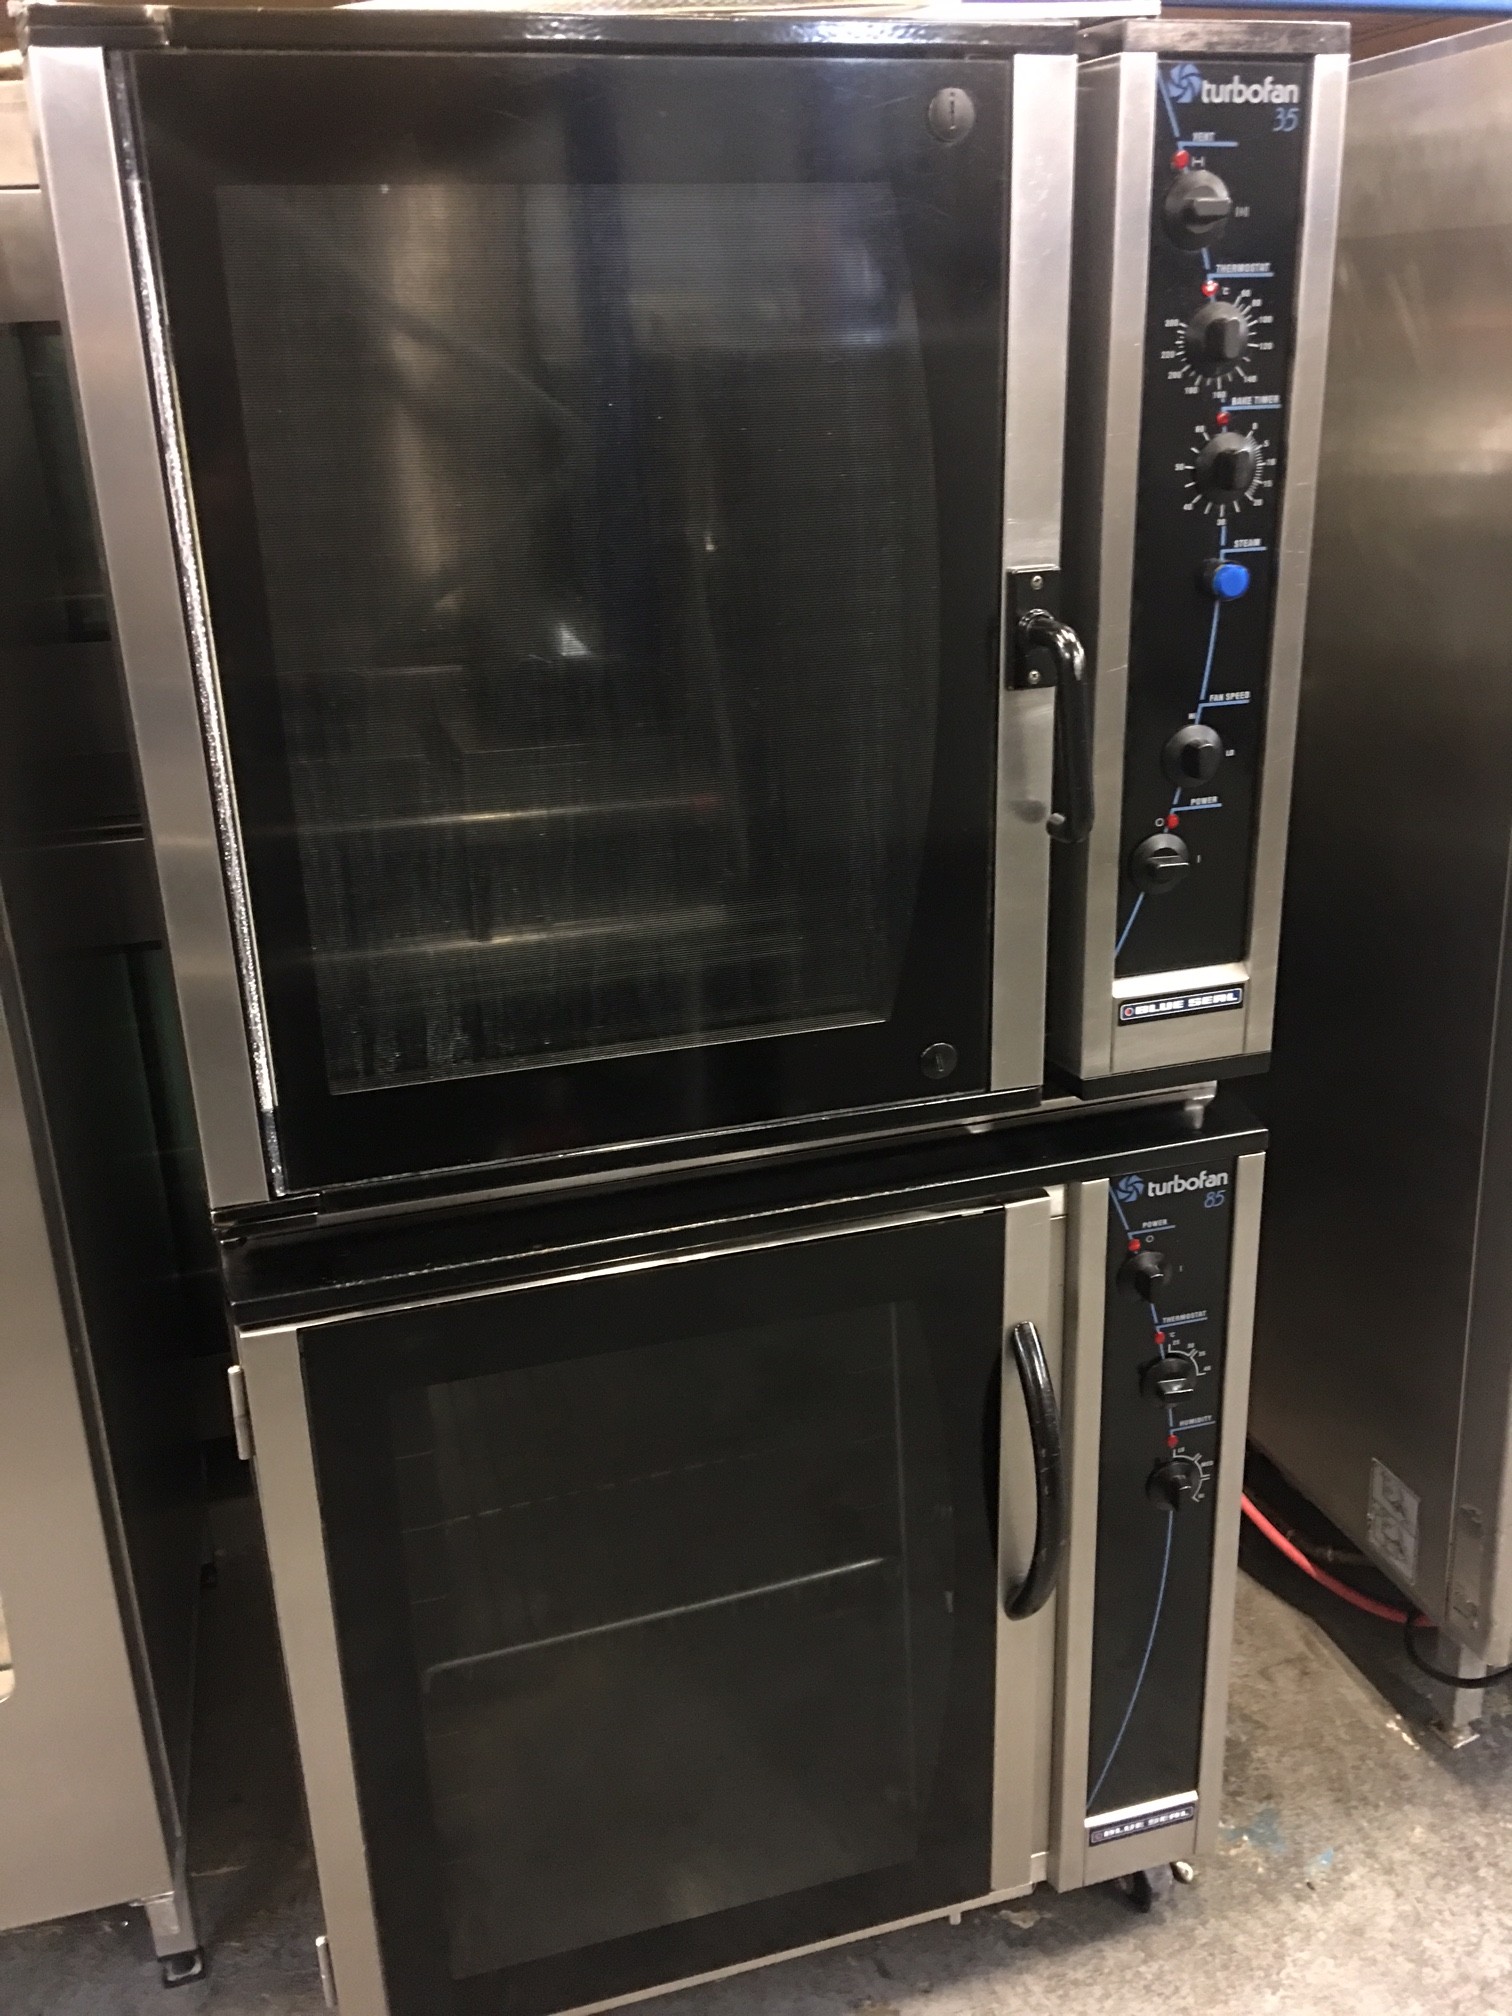 Blue Seal Turbofan 35 Oven 6 Grid Electric 3 Phase 